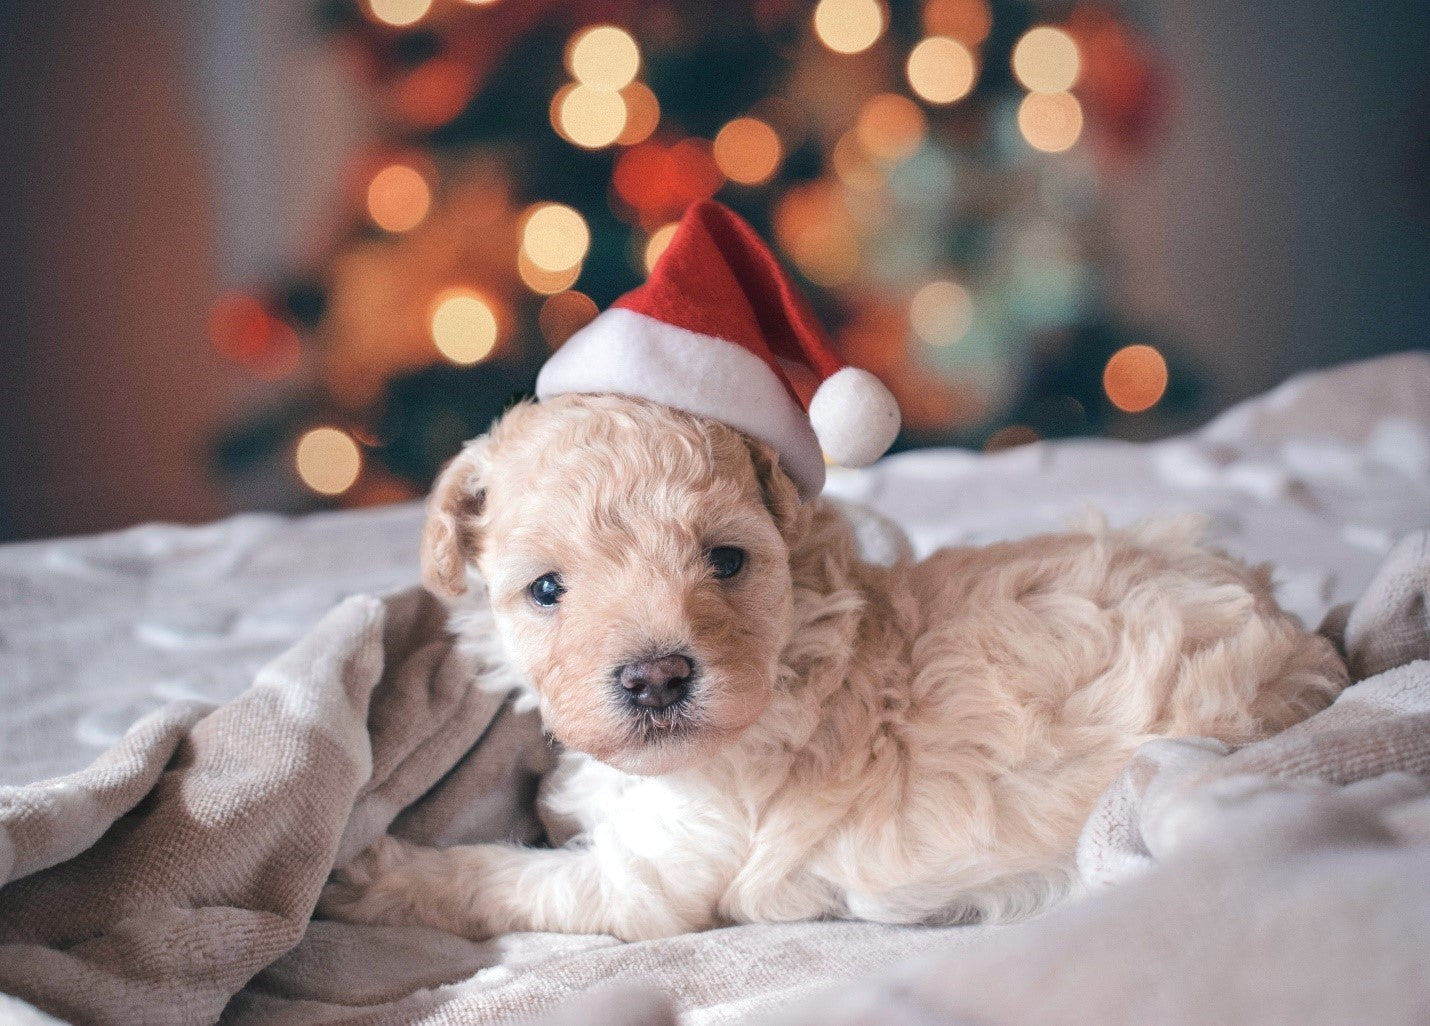 Puppy on bed with Santa hat